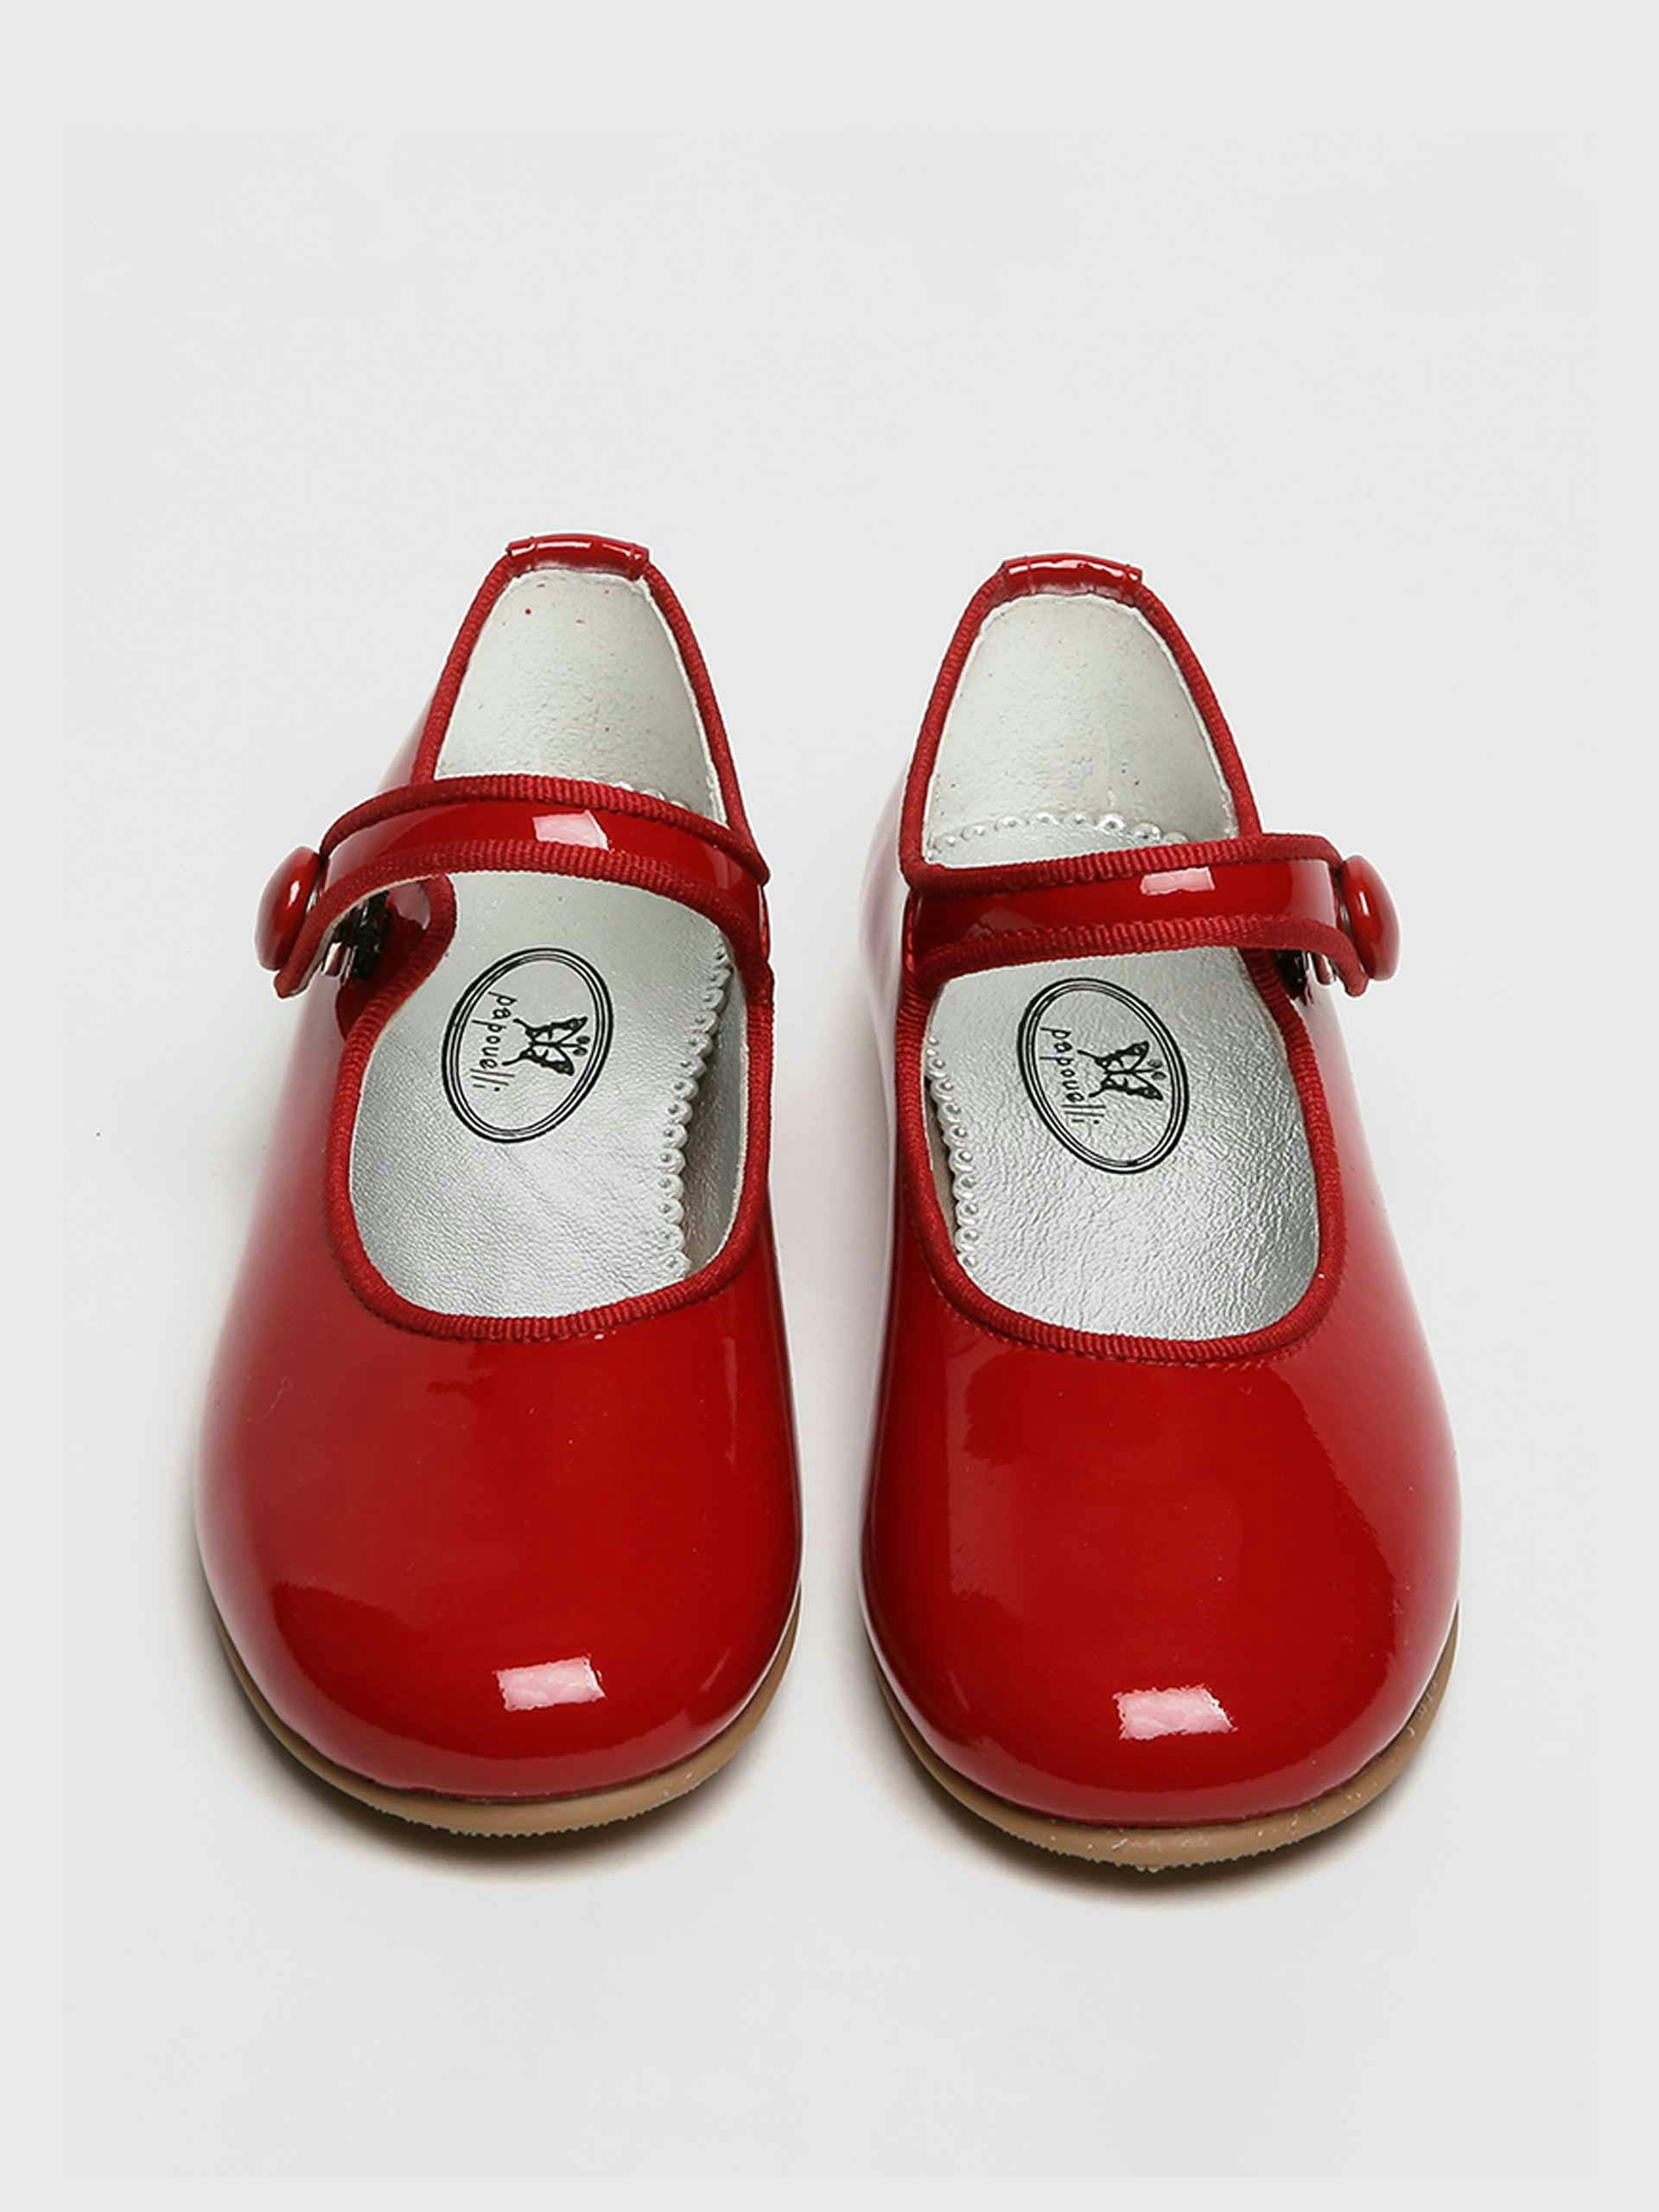 Red patent leather Angelica shoes